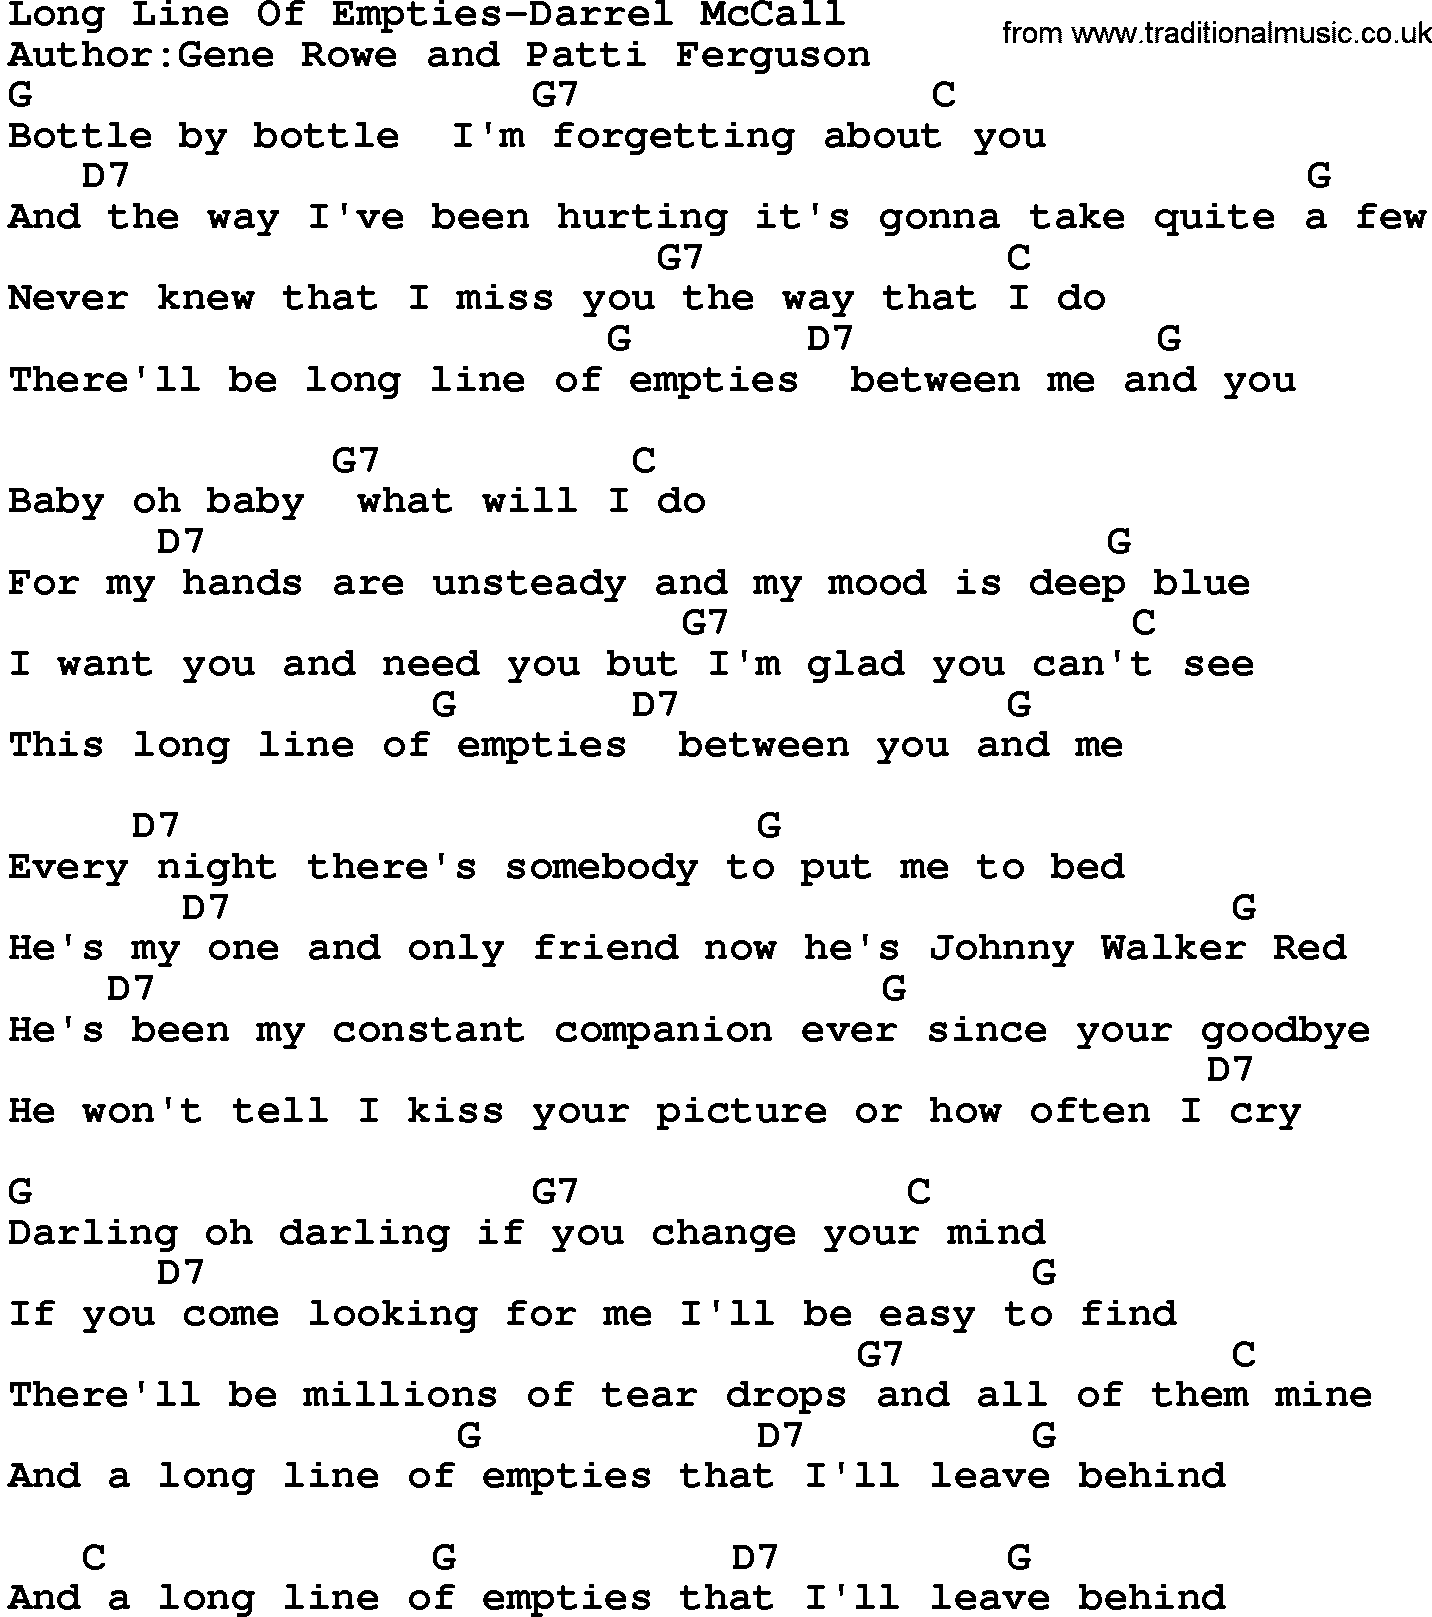 Country music song: Long Line Of Empties-Darrel Mccall lyrics and chords